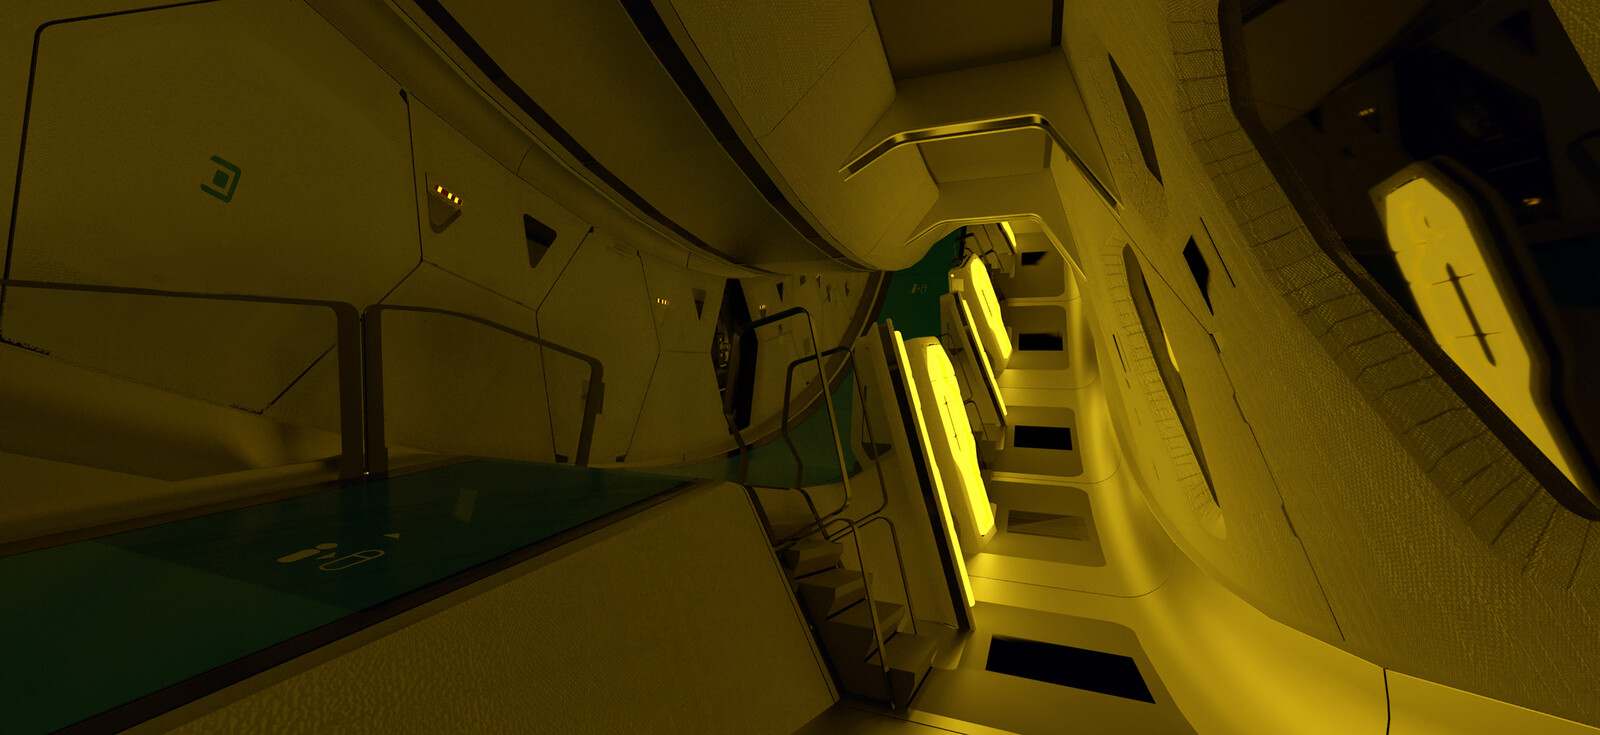 FTL inside, main shape was done by William Cheng, my task was to work the material, lighting and walls detail